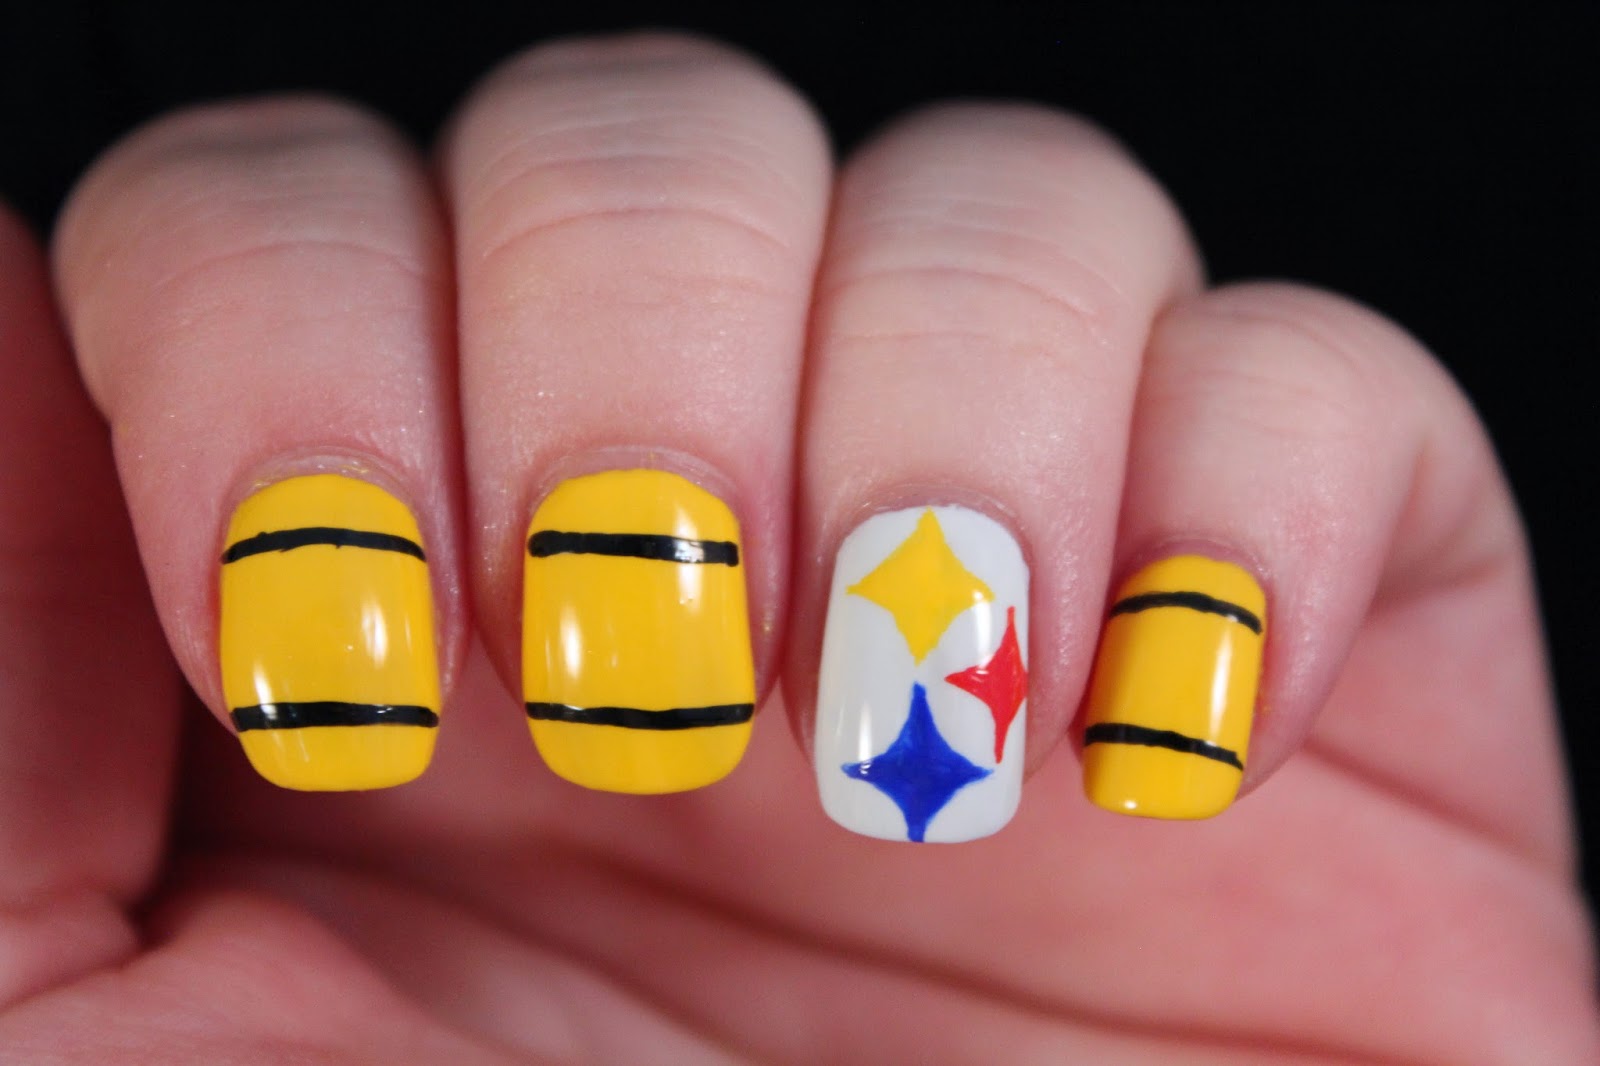 1. Pittsburgh Steelers Nail Art Decals - wide 2